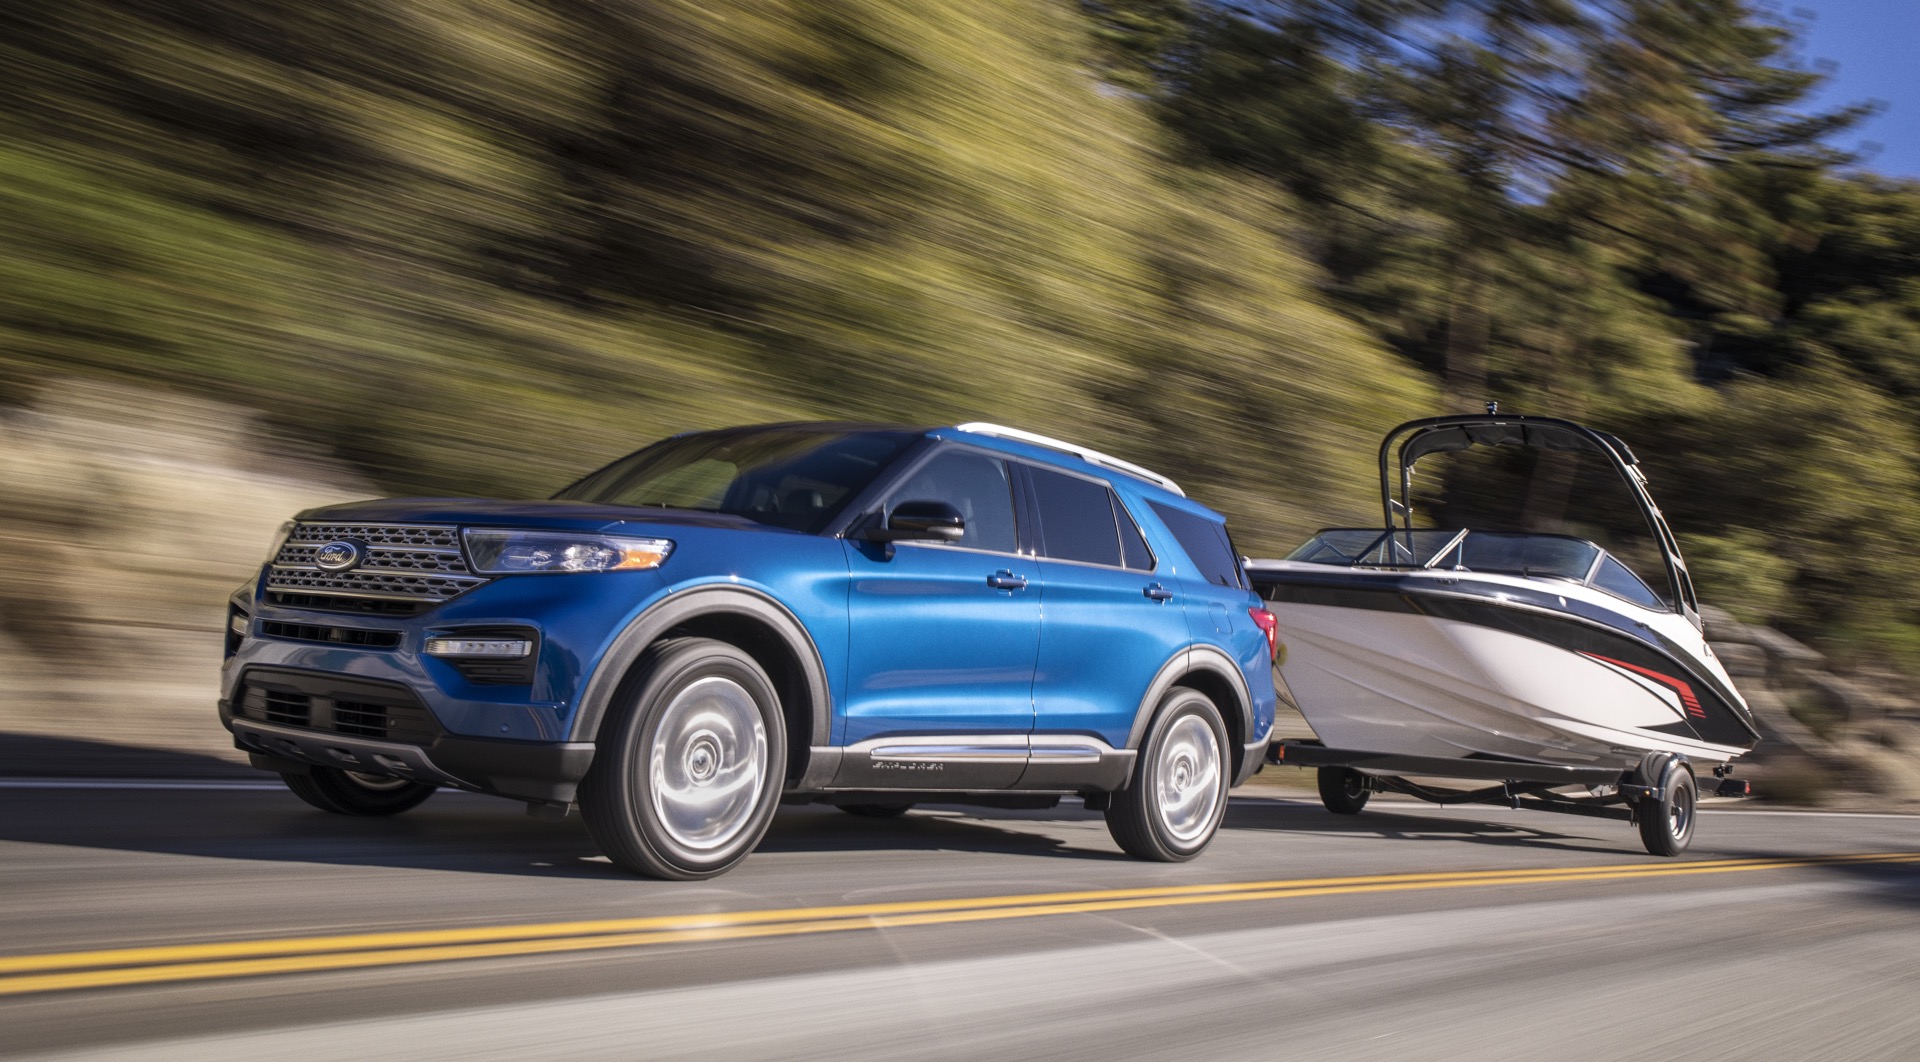 2020 Ford Explorer Hybrid rated at up to 28 mpg combined